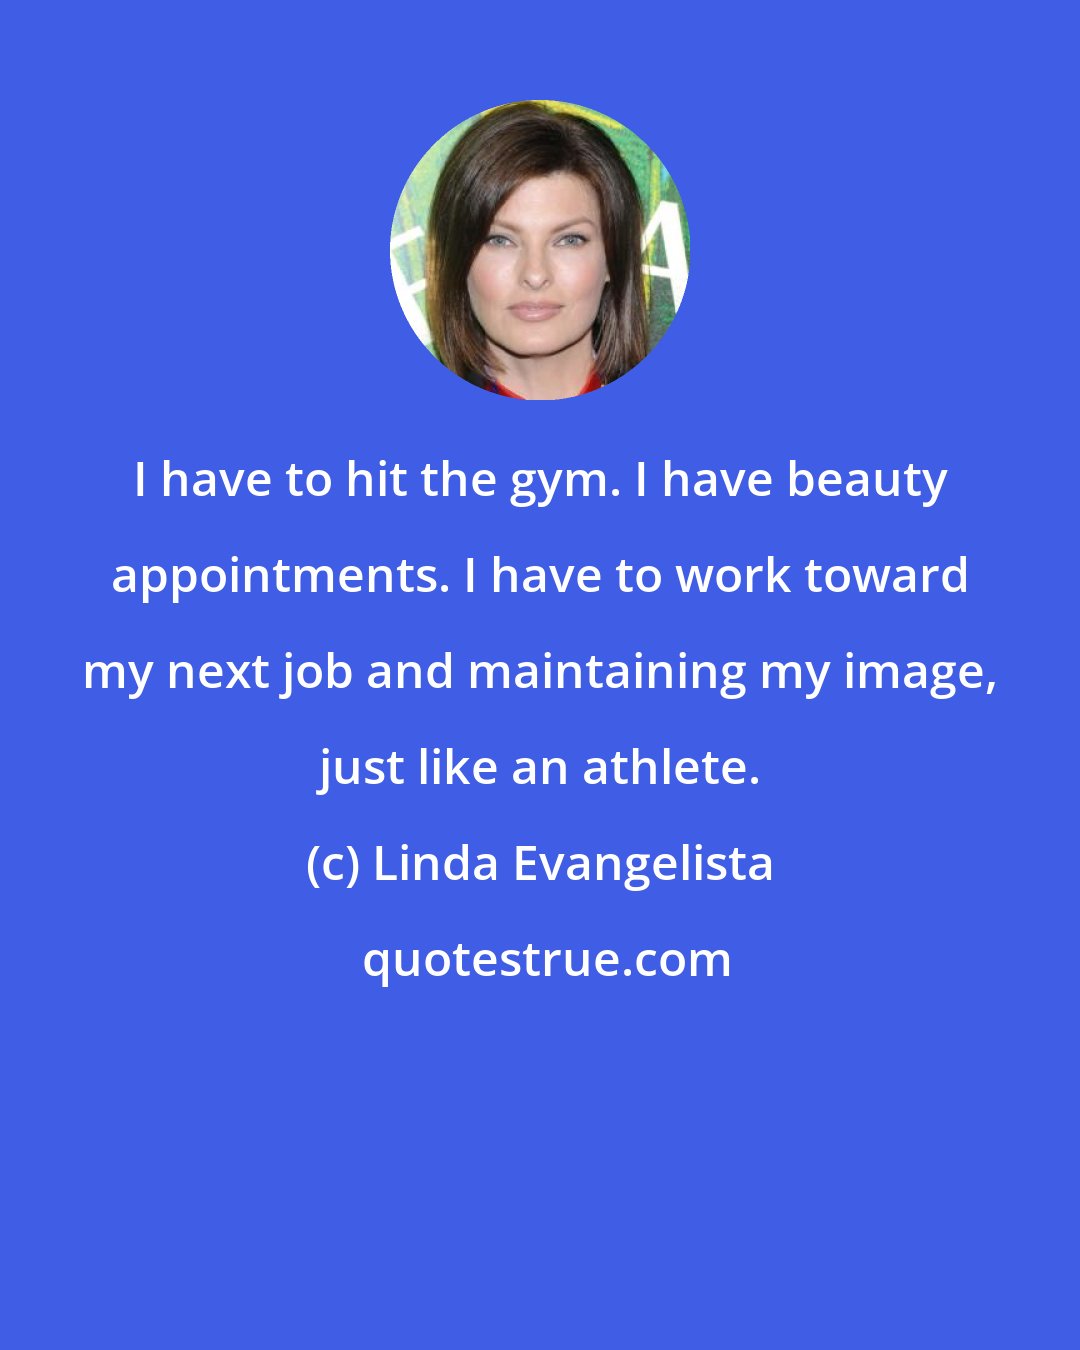 Linda Evangelista: I have to hit the gym. I have beauty appointments. I have to work toward my next job and maintaining my image, just like an athlete.